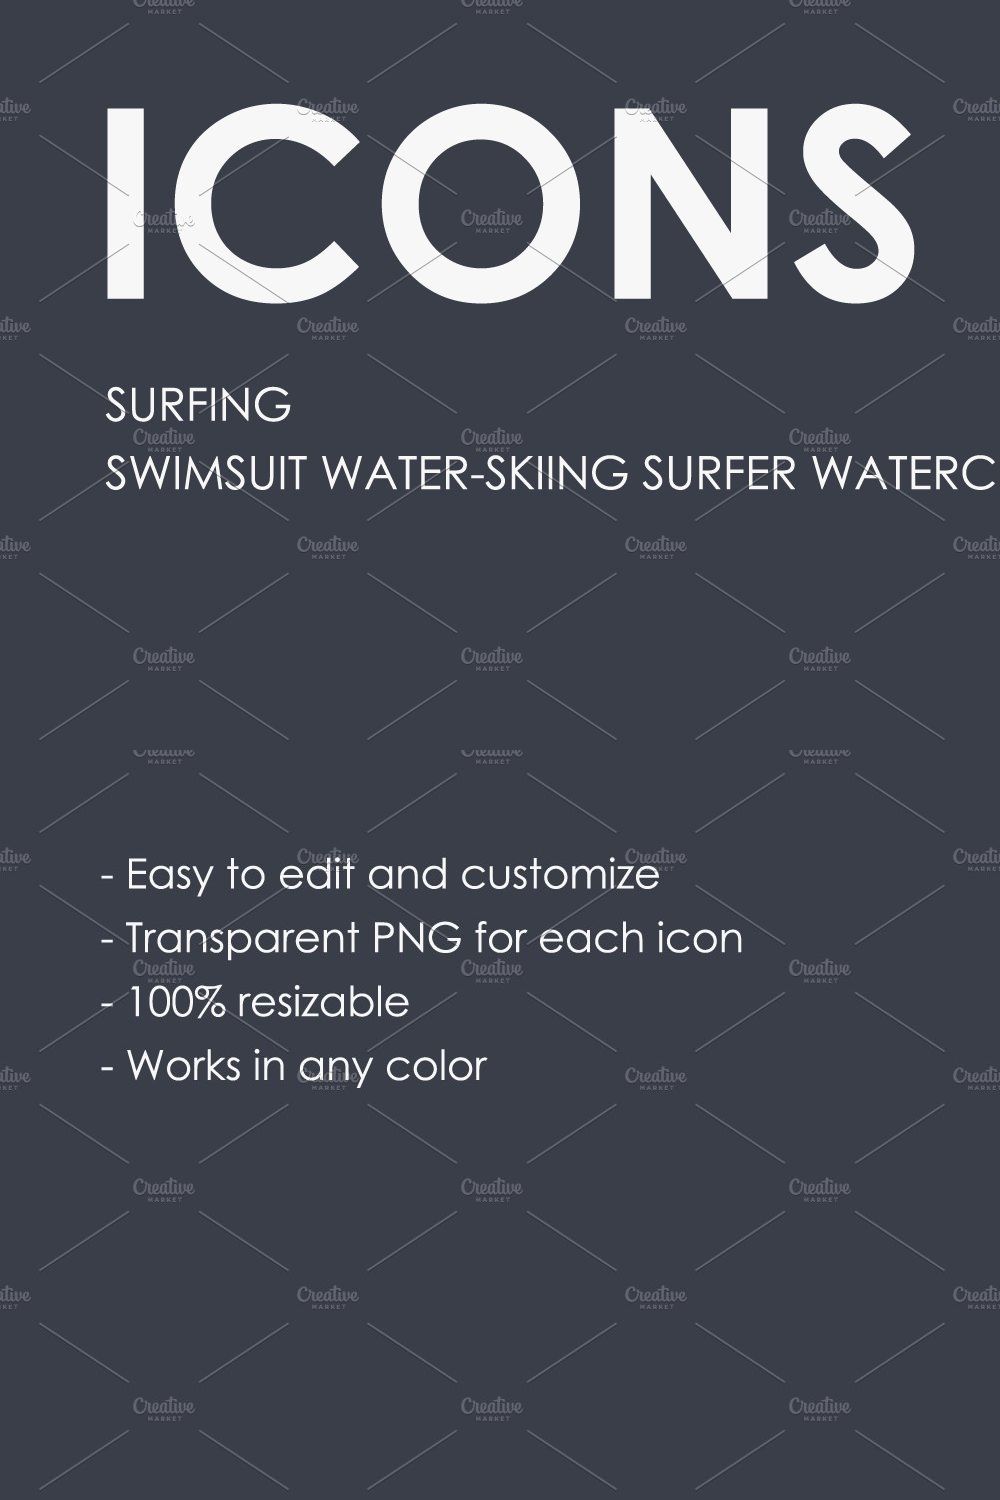 Surfing thinline icons pinterest preview image.